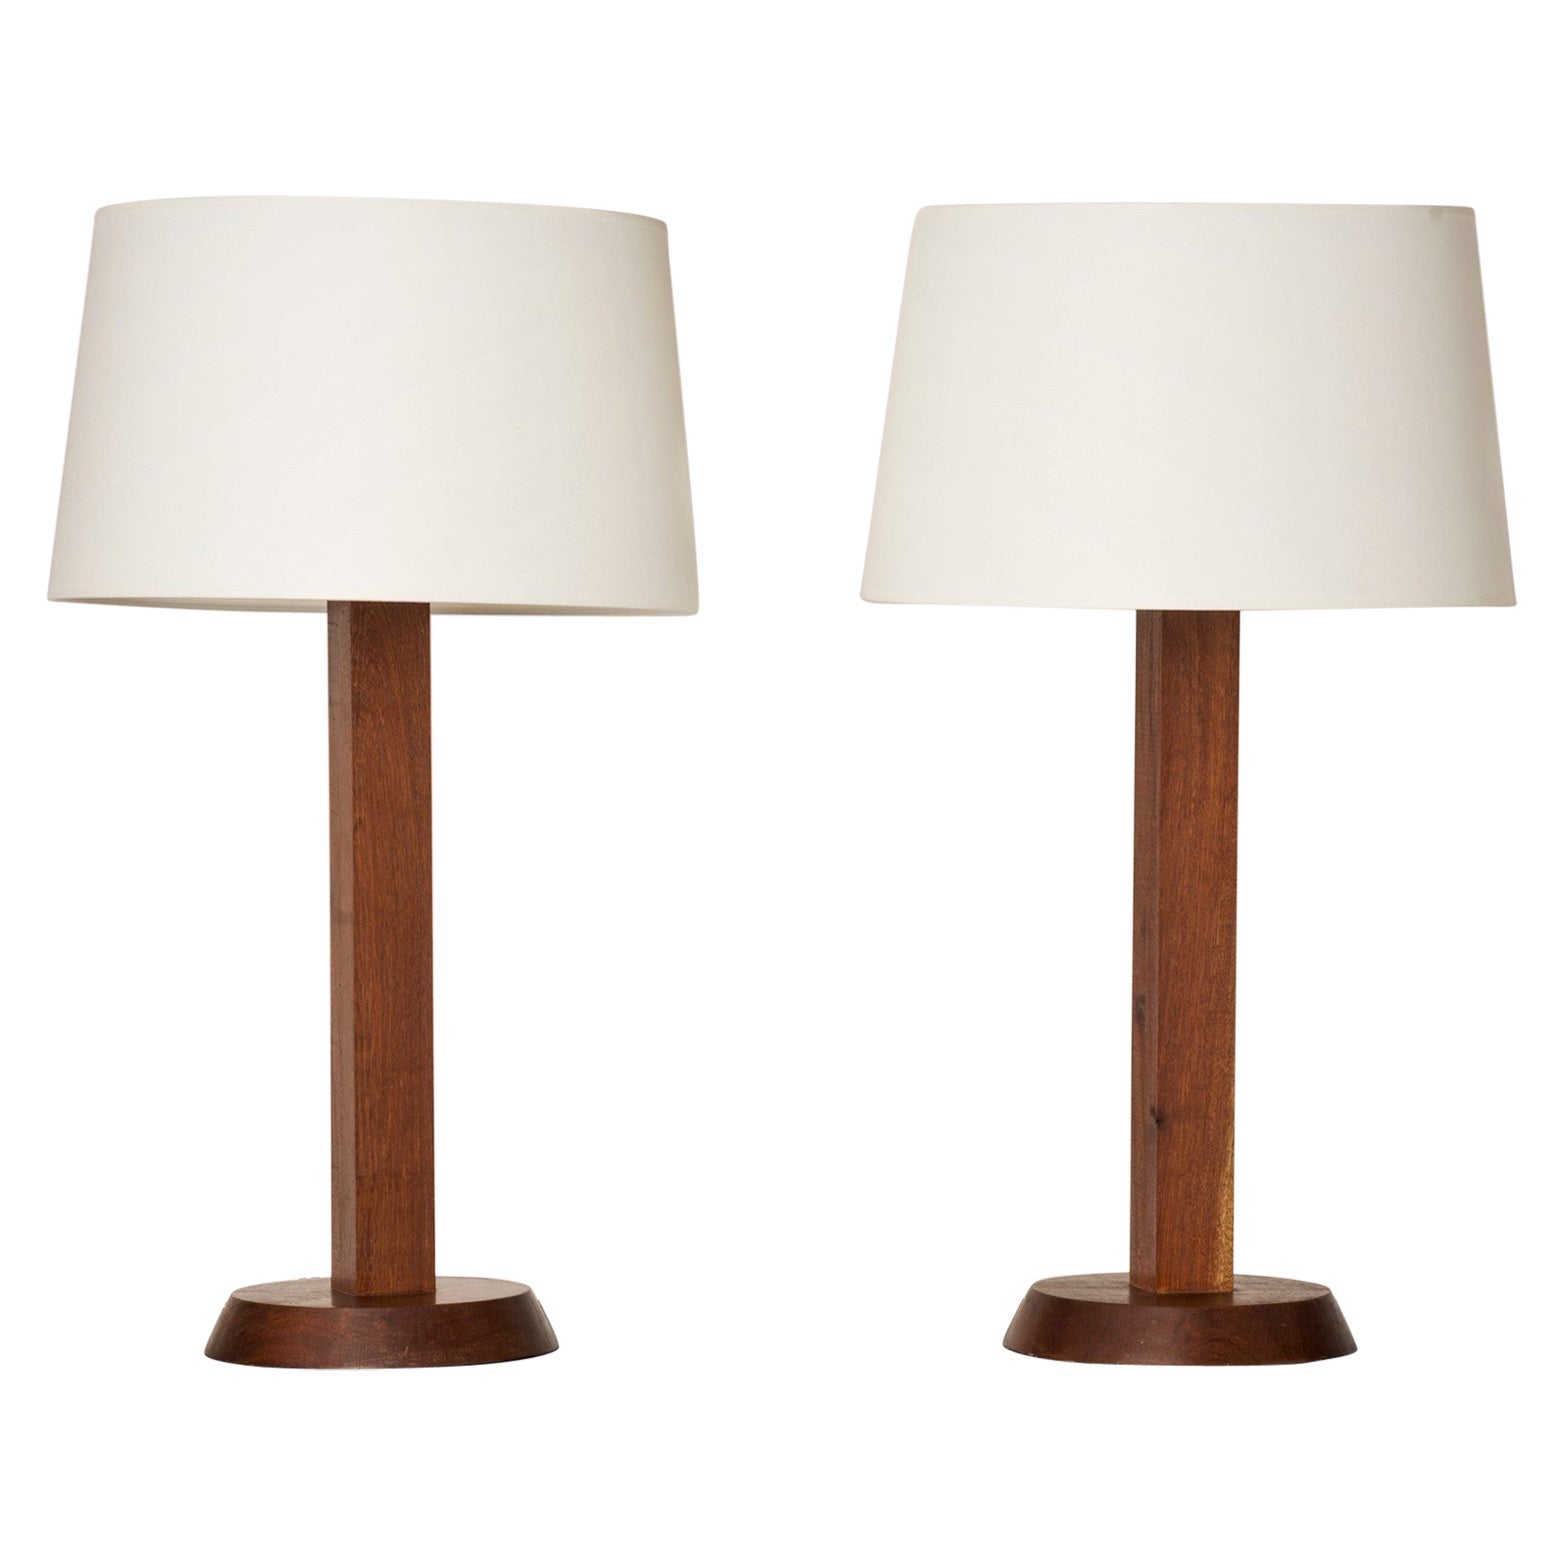 Pair of Minimalist Solid Teak Table Lamps - France 1970's For Sale